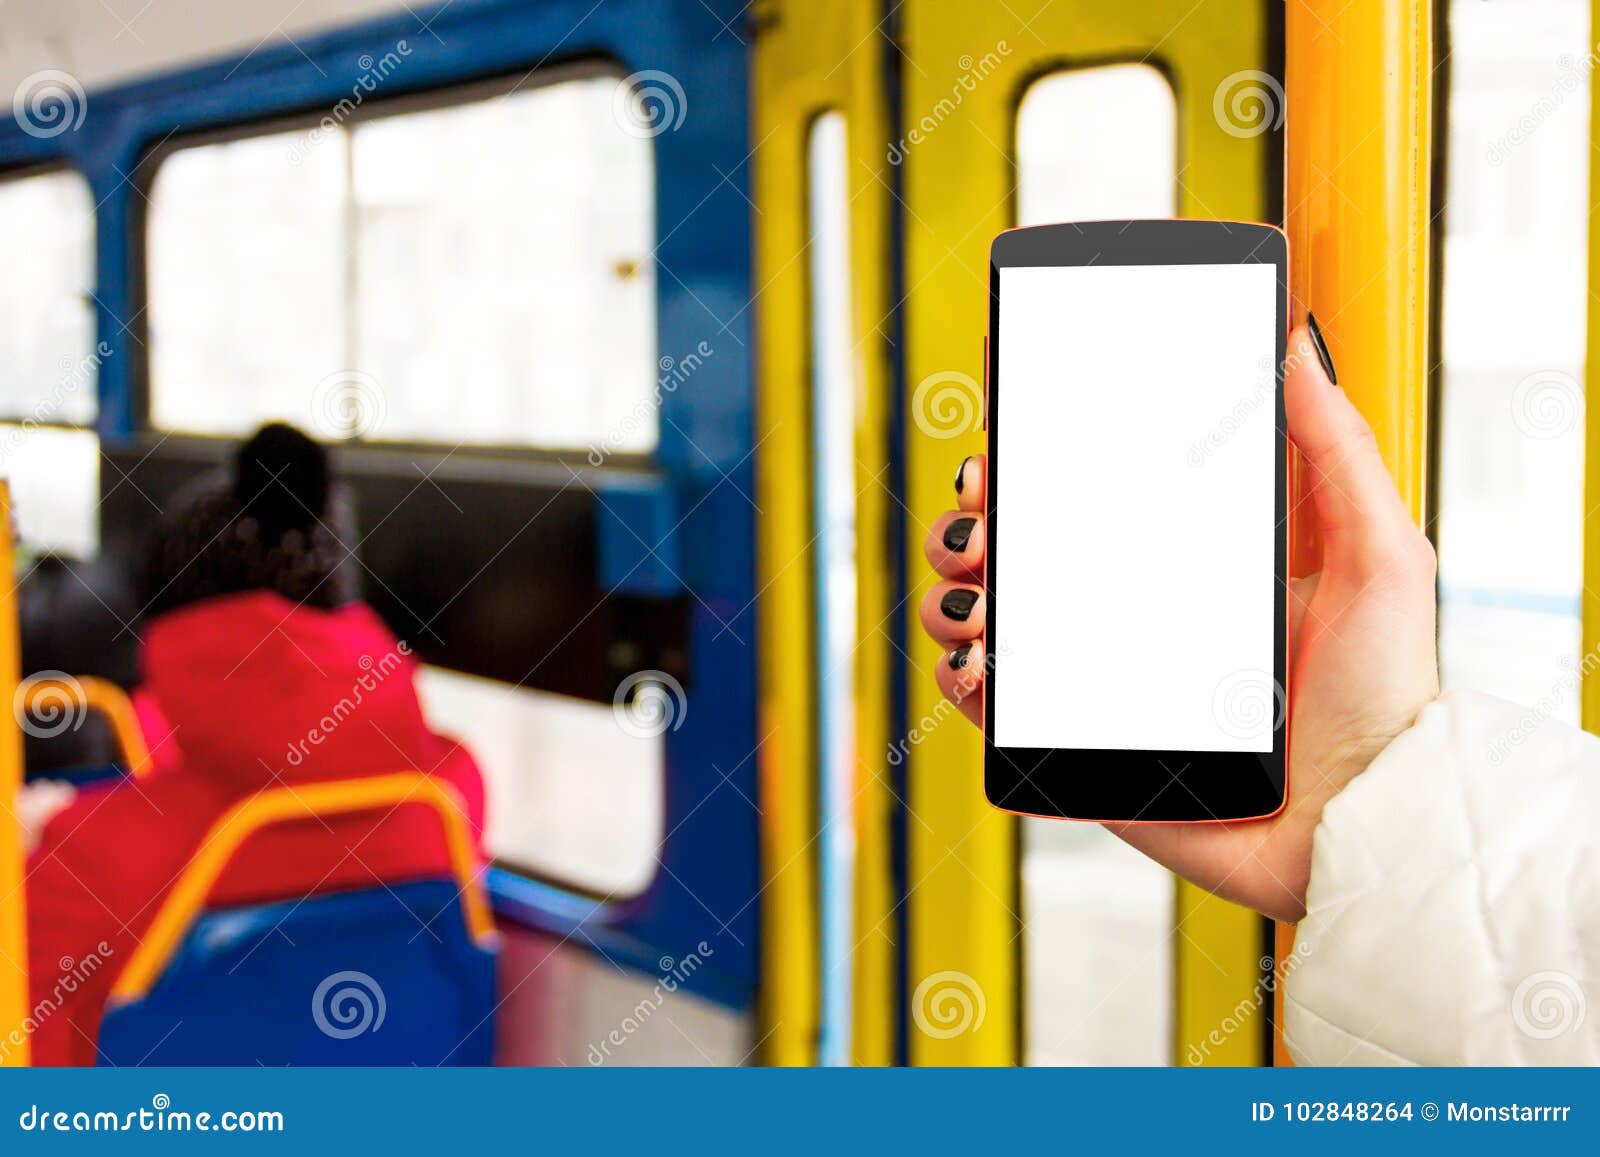 Download Tram Mockup Photos Free Royalty Free Stock Photos From Dreamstime